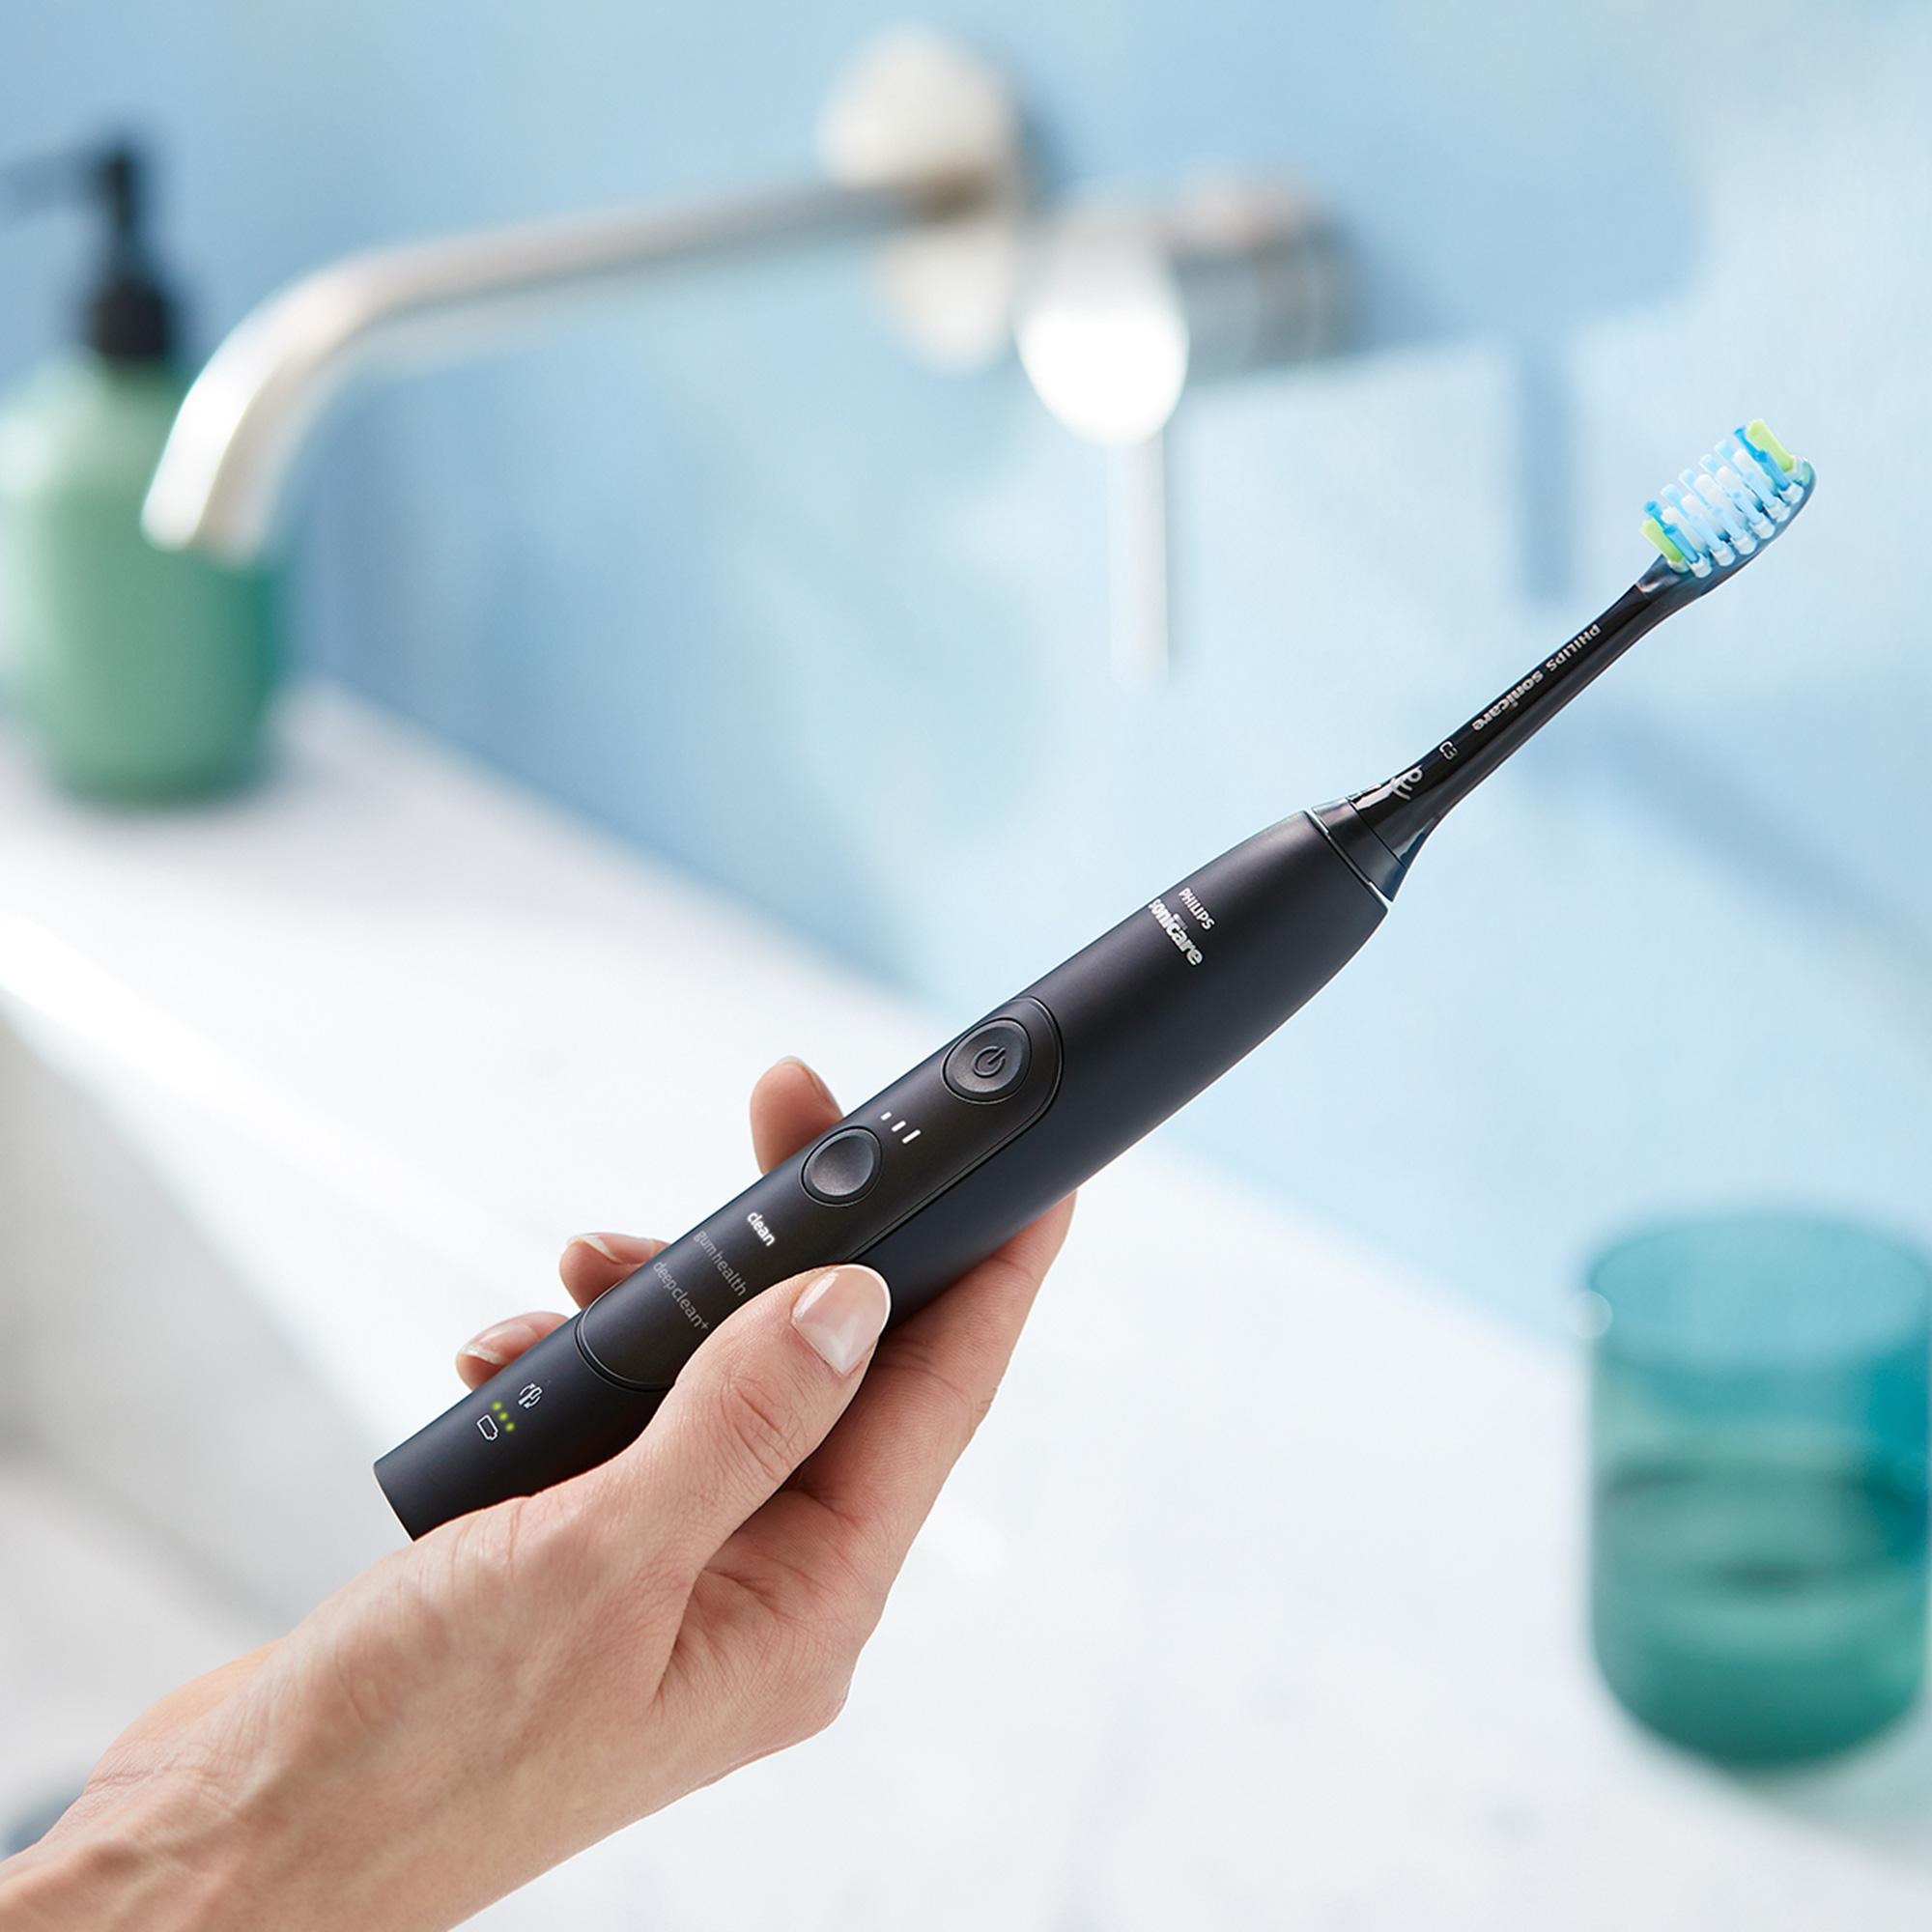 Philips Sonicare 7300 ExpertClean Electric Toothbrush Black Image 4